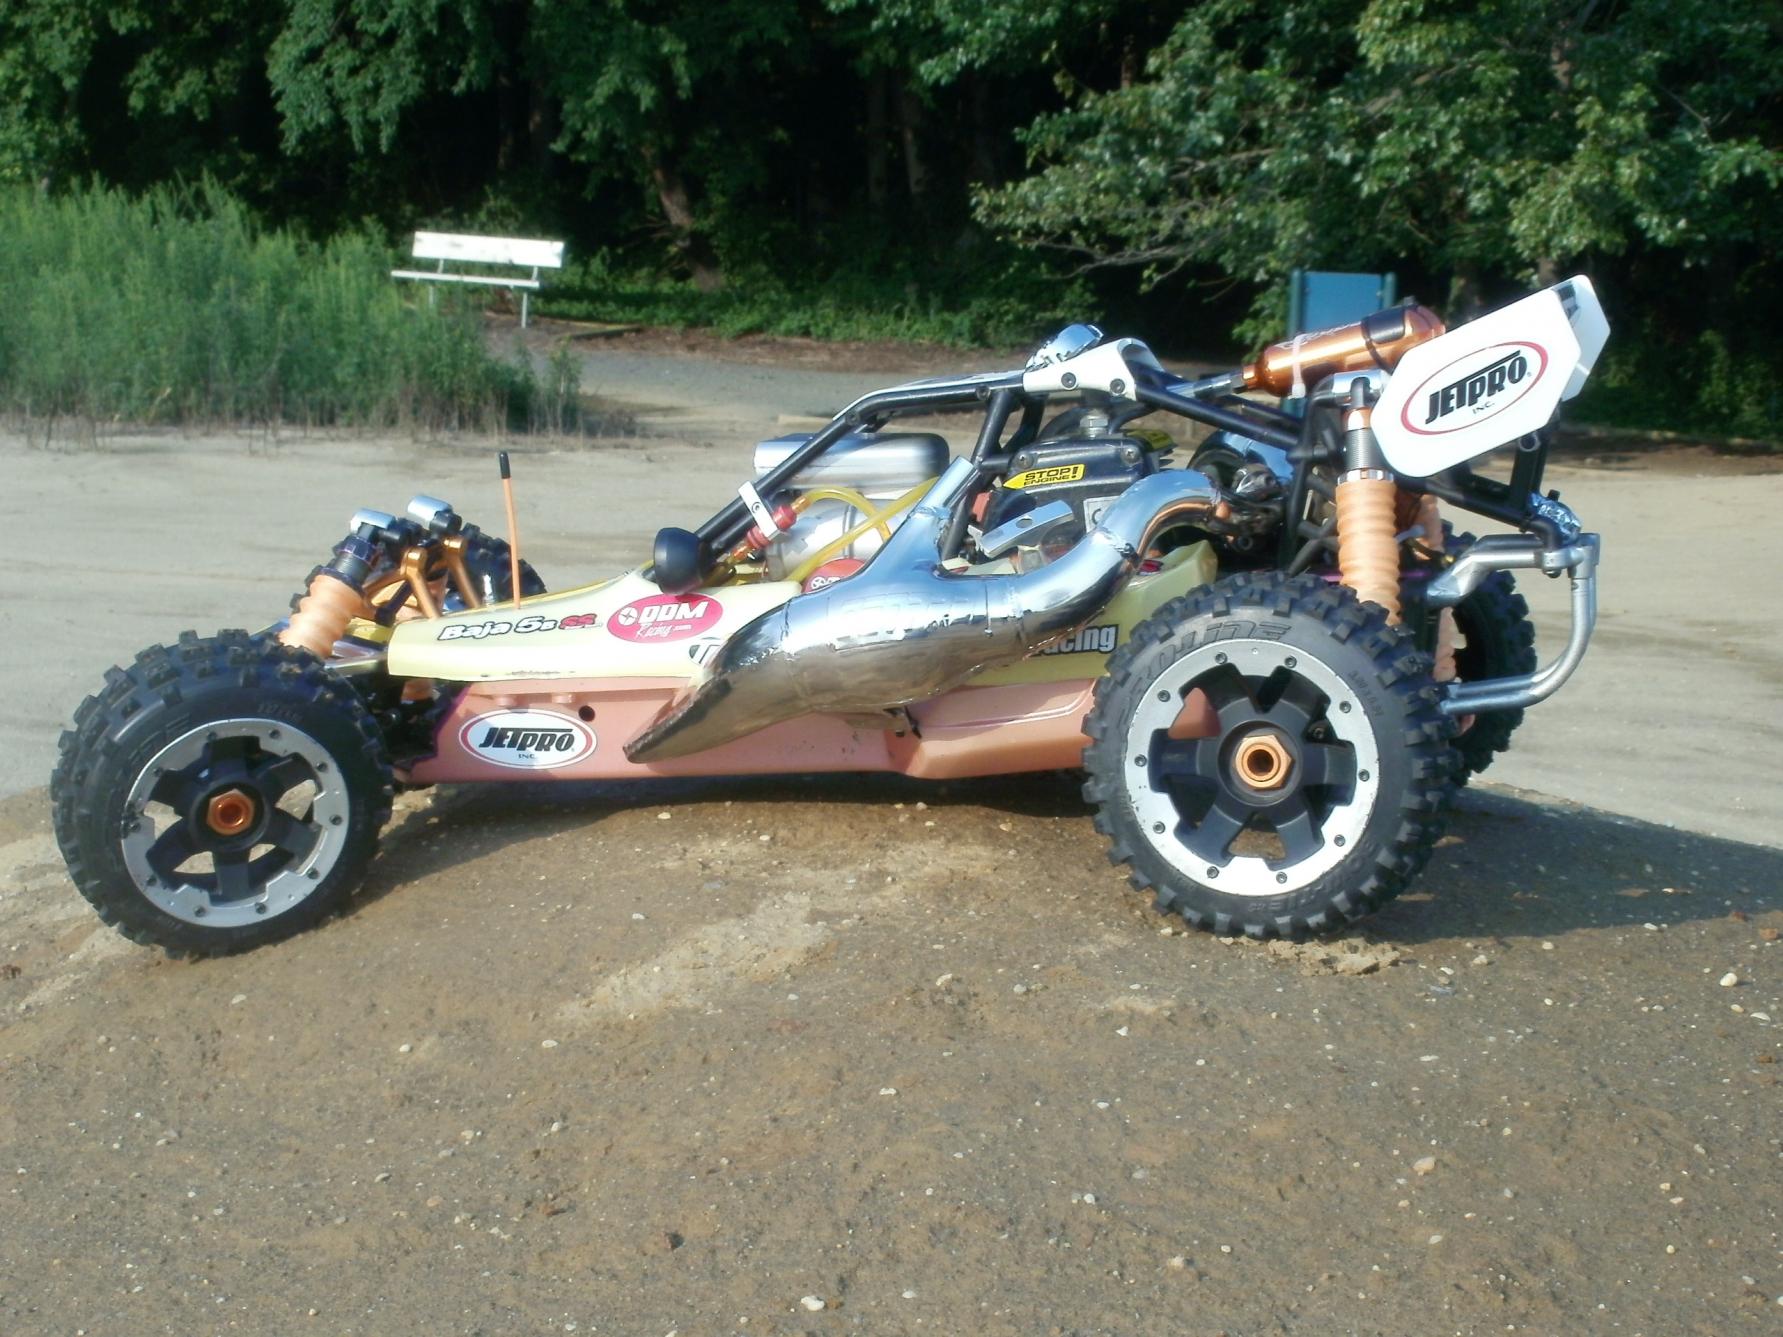 Sweet HPI Baja 5B For Sale or Trade - R/C Tech Forums